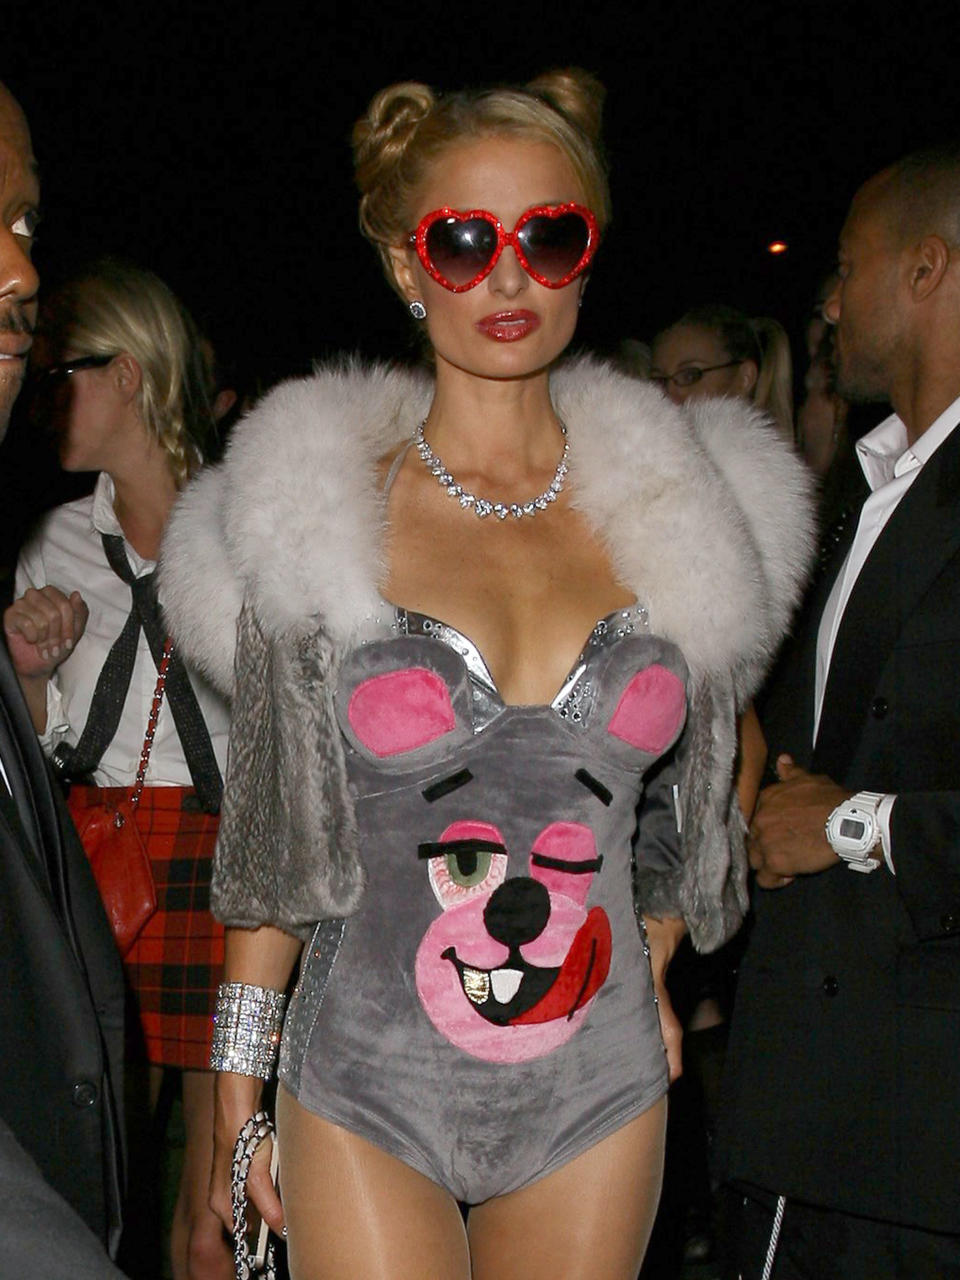 Paris Hilton as Miley Cyrus Halloween  at the Roosevelt Hotel in Hollywood, California on October 26, 2013.